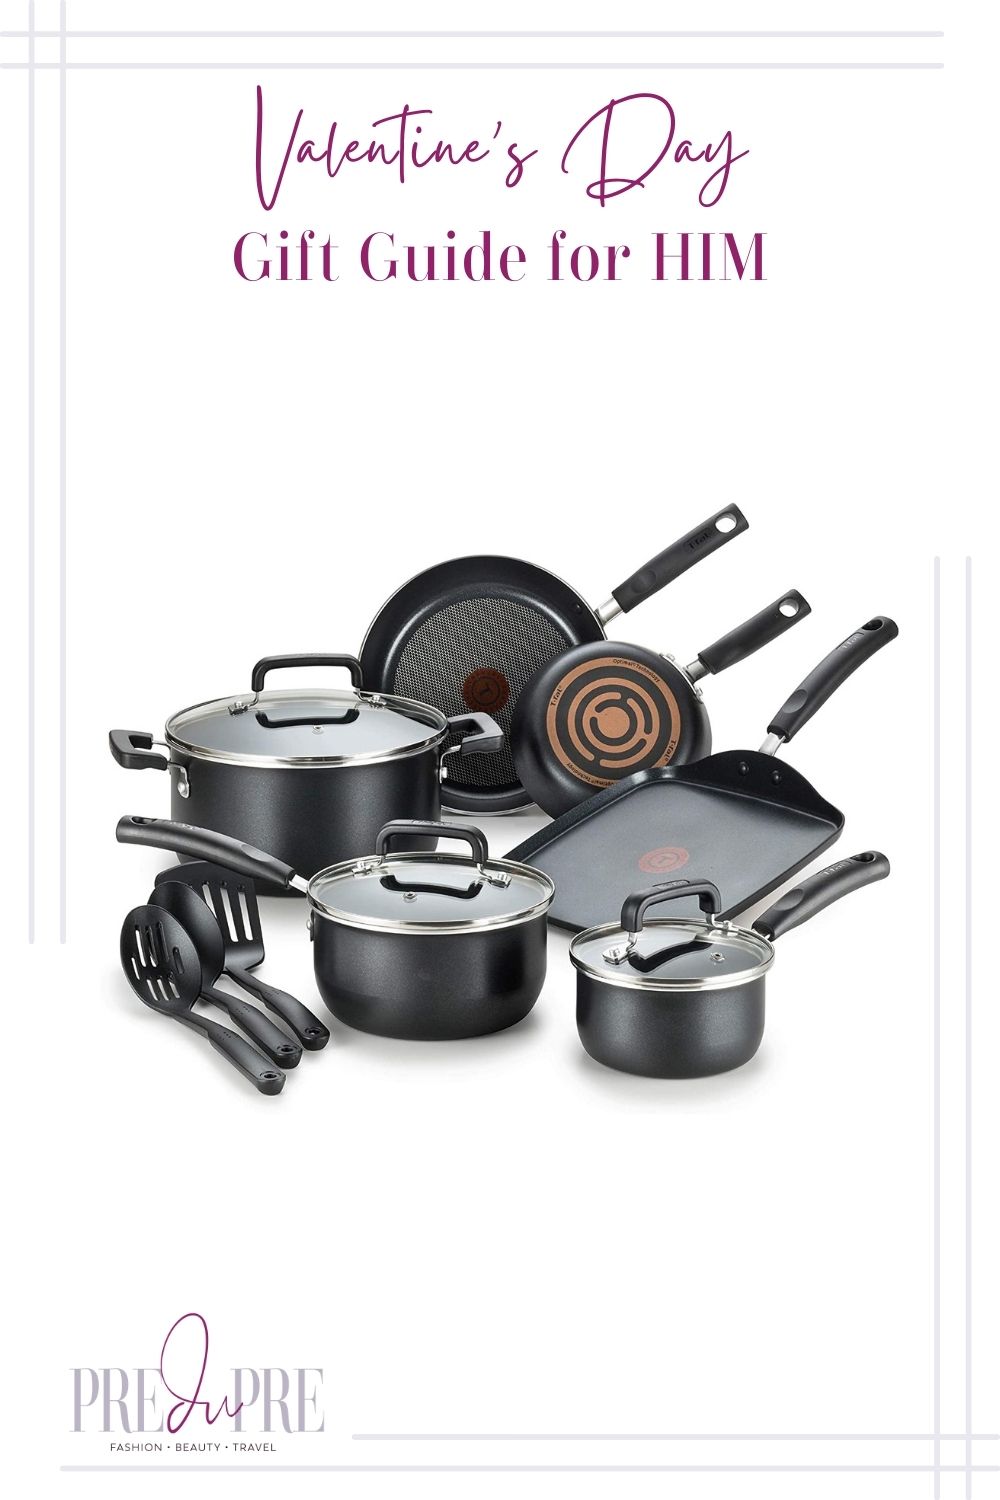 12-piece black cookware set image with text in the center top stating "Valentine's Day Gift Guide for Him."